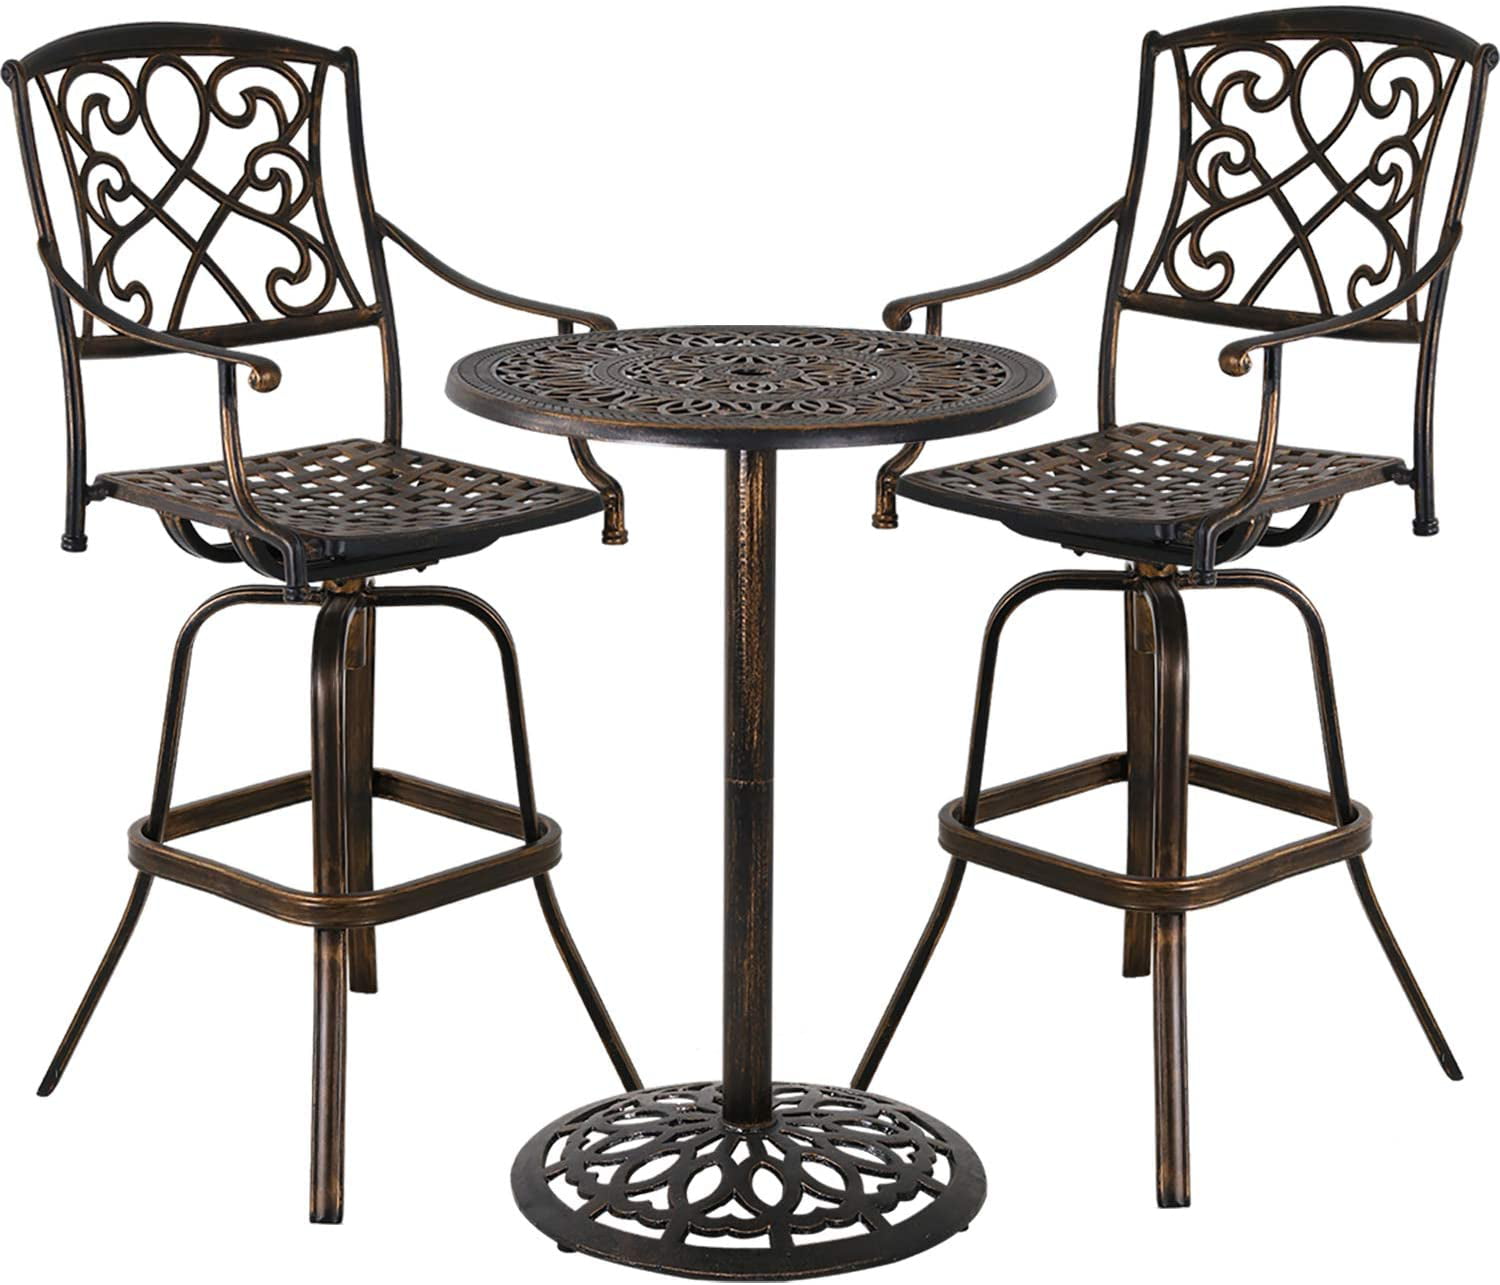 Bar Table And Stool Outdoor, Outdoor Counter Height Bar Stools And Table